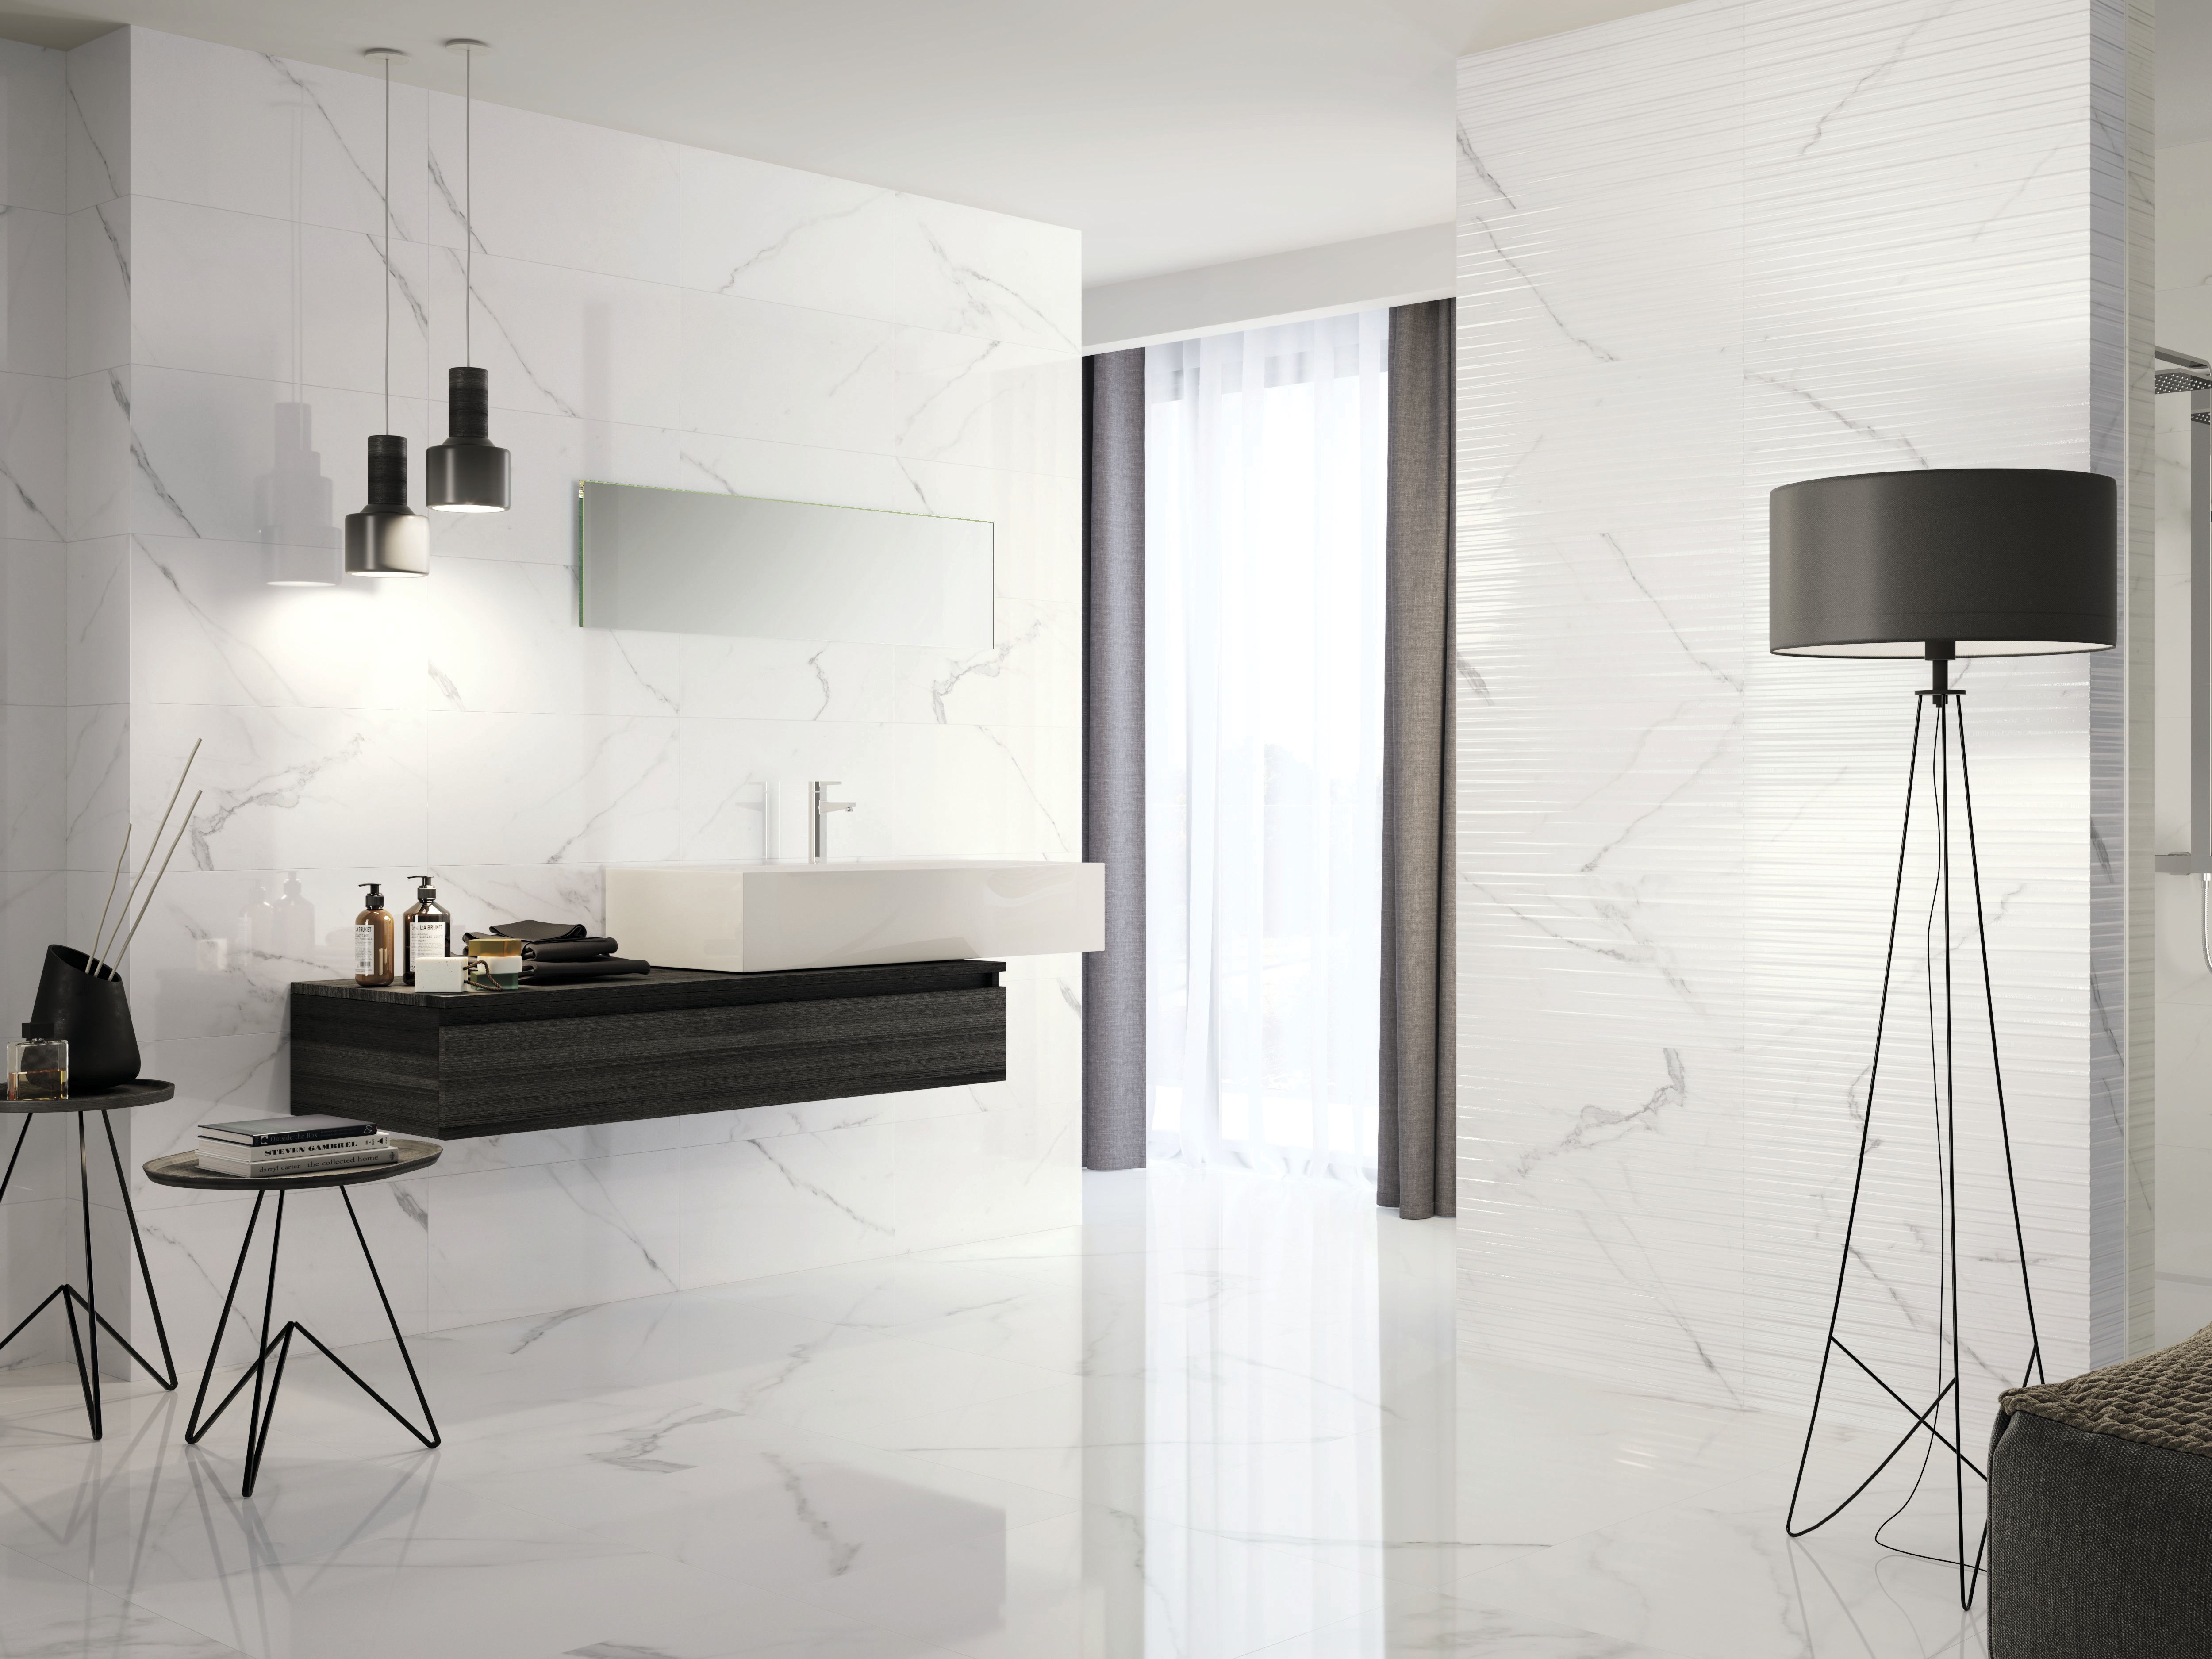 Image of Wickes Boutique Palmas Glazed Porcelain Wall & Floor Tile - 600 x 600mm